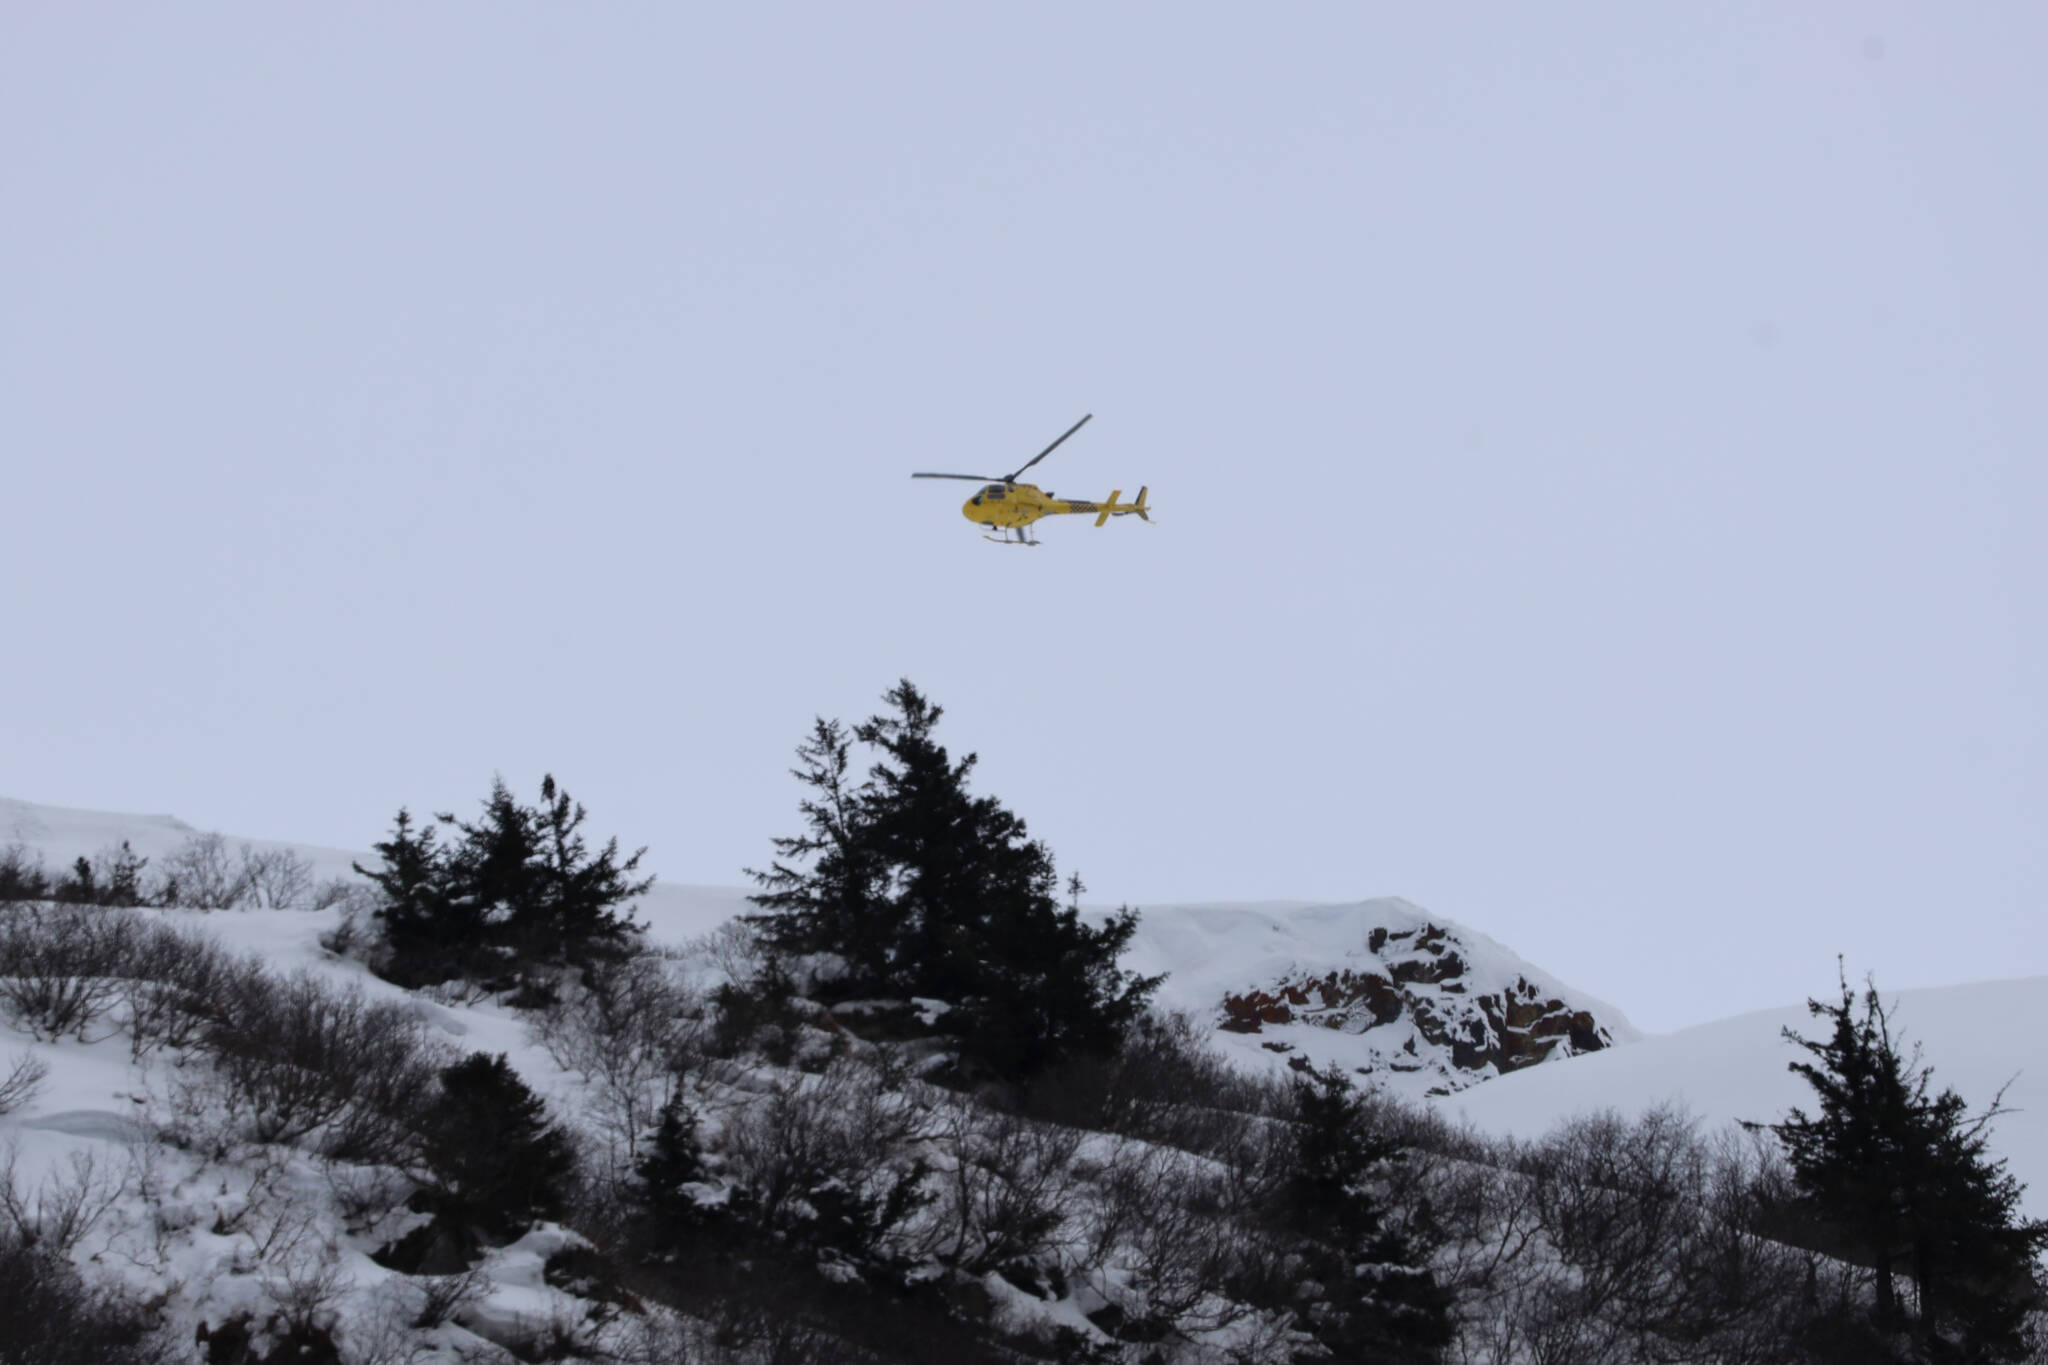 The Alaska Department of Transportation and Public Facilities drops explosives via helicopter to trigger controlled avalanches above Thane Road Tuesday afternoon. (Clarise Larson / Juneau Empire)